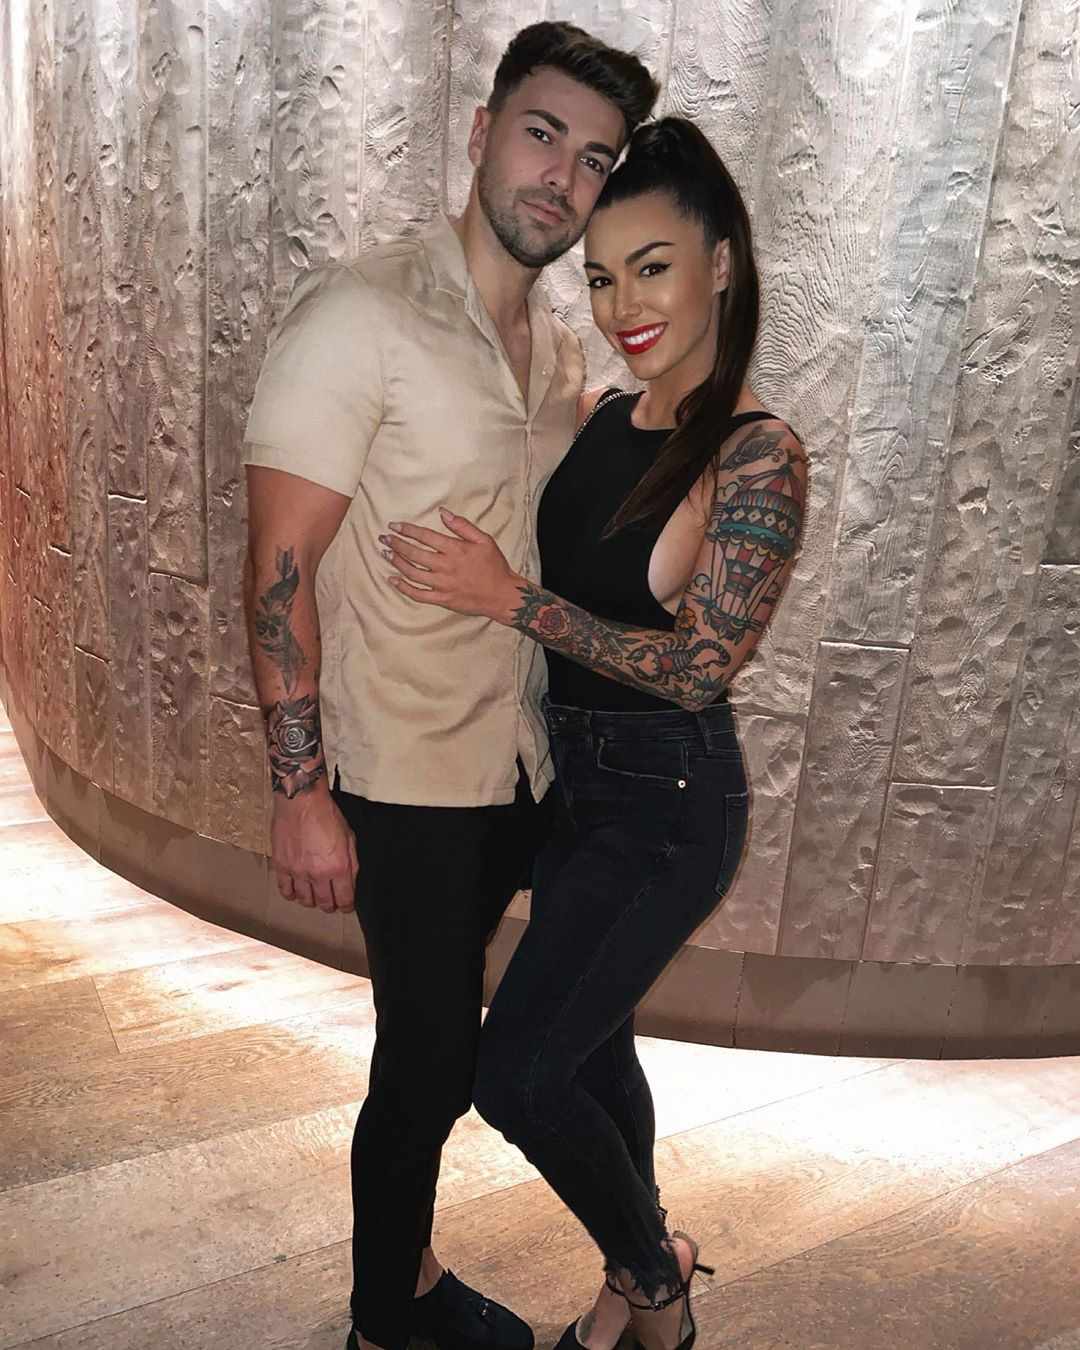 <p>From reality TV to real-life love! The Challenge's Kailah Casillas and Love Island's Sam Bird are engaged, Casillas announced on Instagram. </p>
                            <p>"I'm marrying my favorite person in the world," Casillas, 27,  captioned an Instagram shot debuting her engagement ring.</p>
                            <p>She offered a closeup of the diamond on her Instagram Story, writing, "I'm lucky."</p>
                            <p>Bird, also 27, showed the newly engaged couple celebrating with chocolate on his Story as they vacation in Greece.</p>
                            